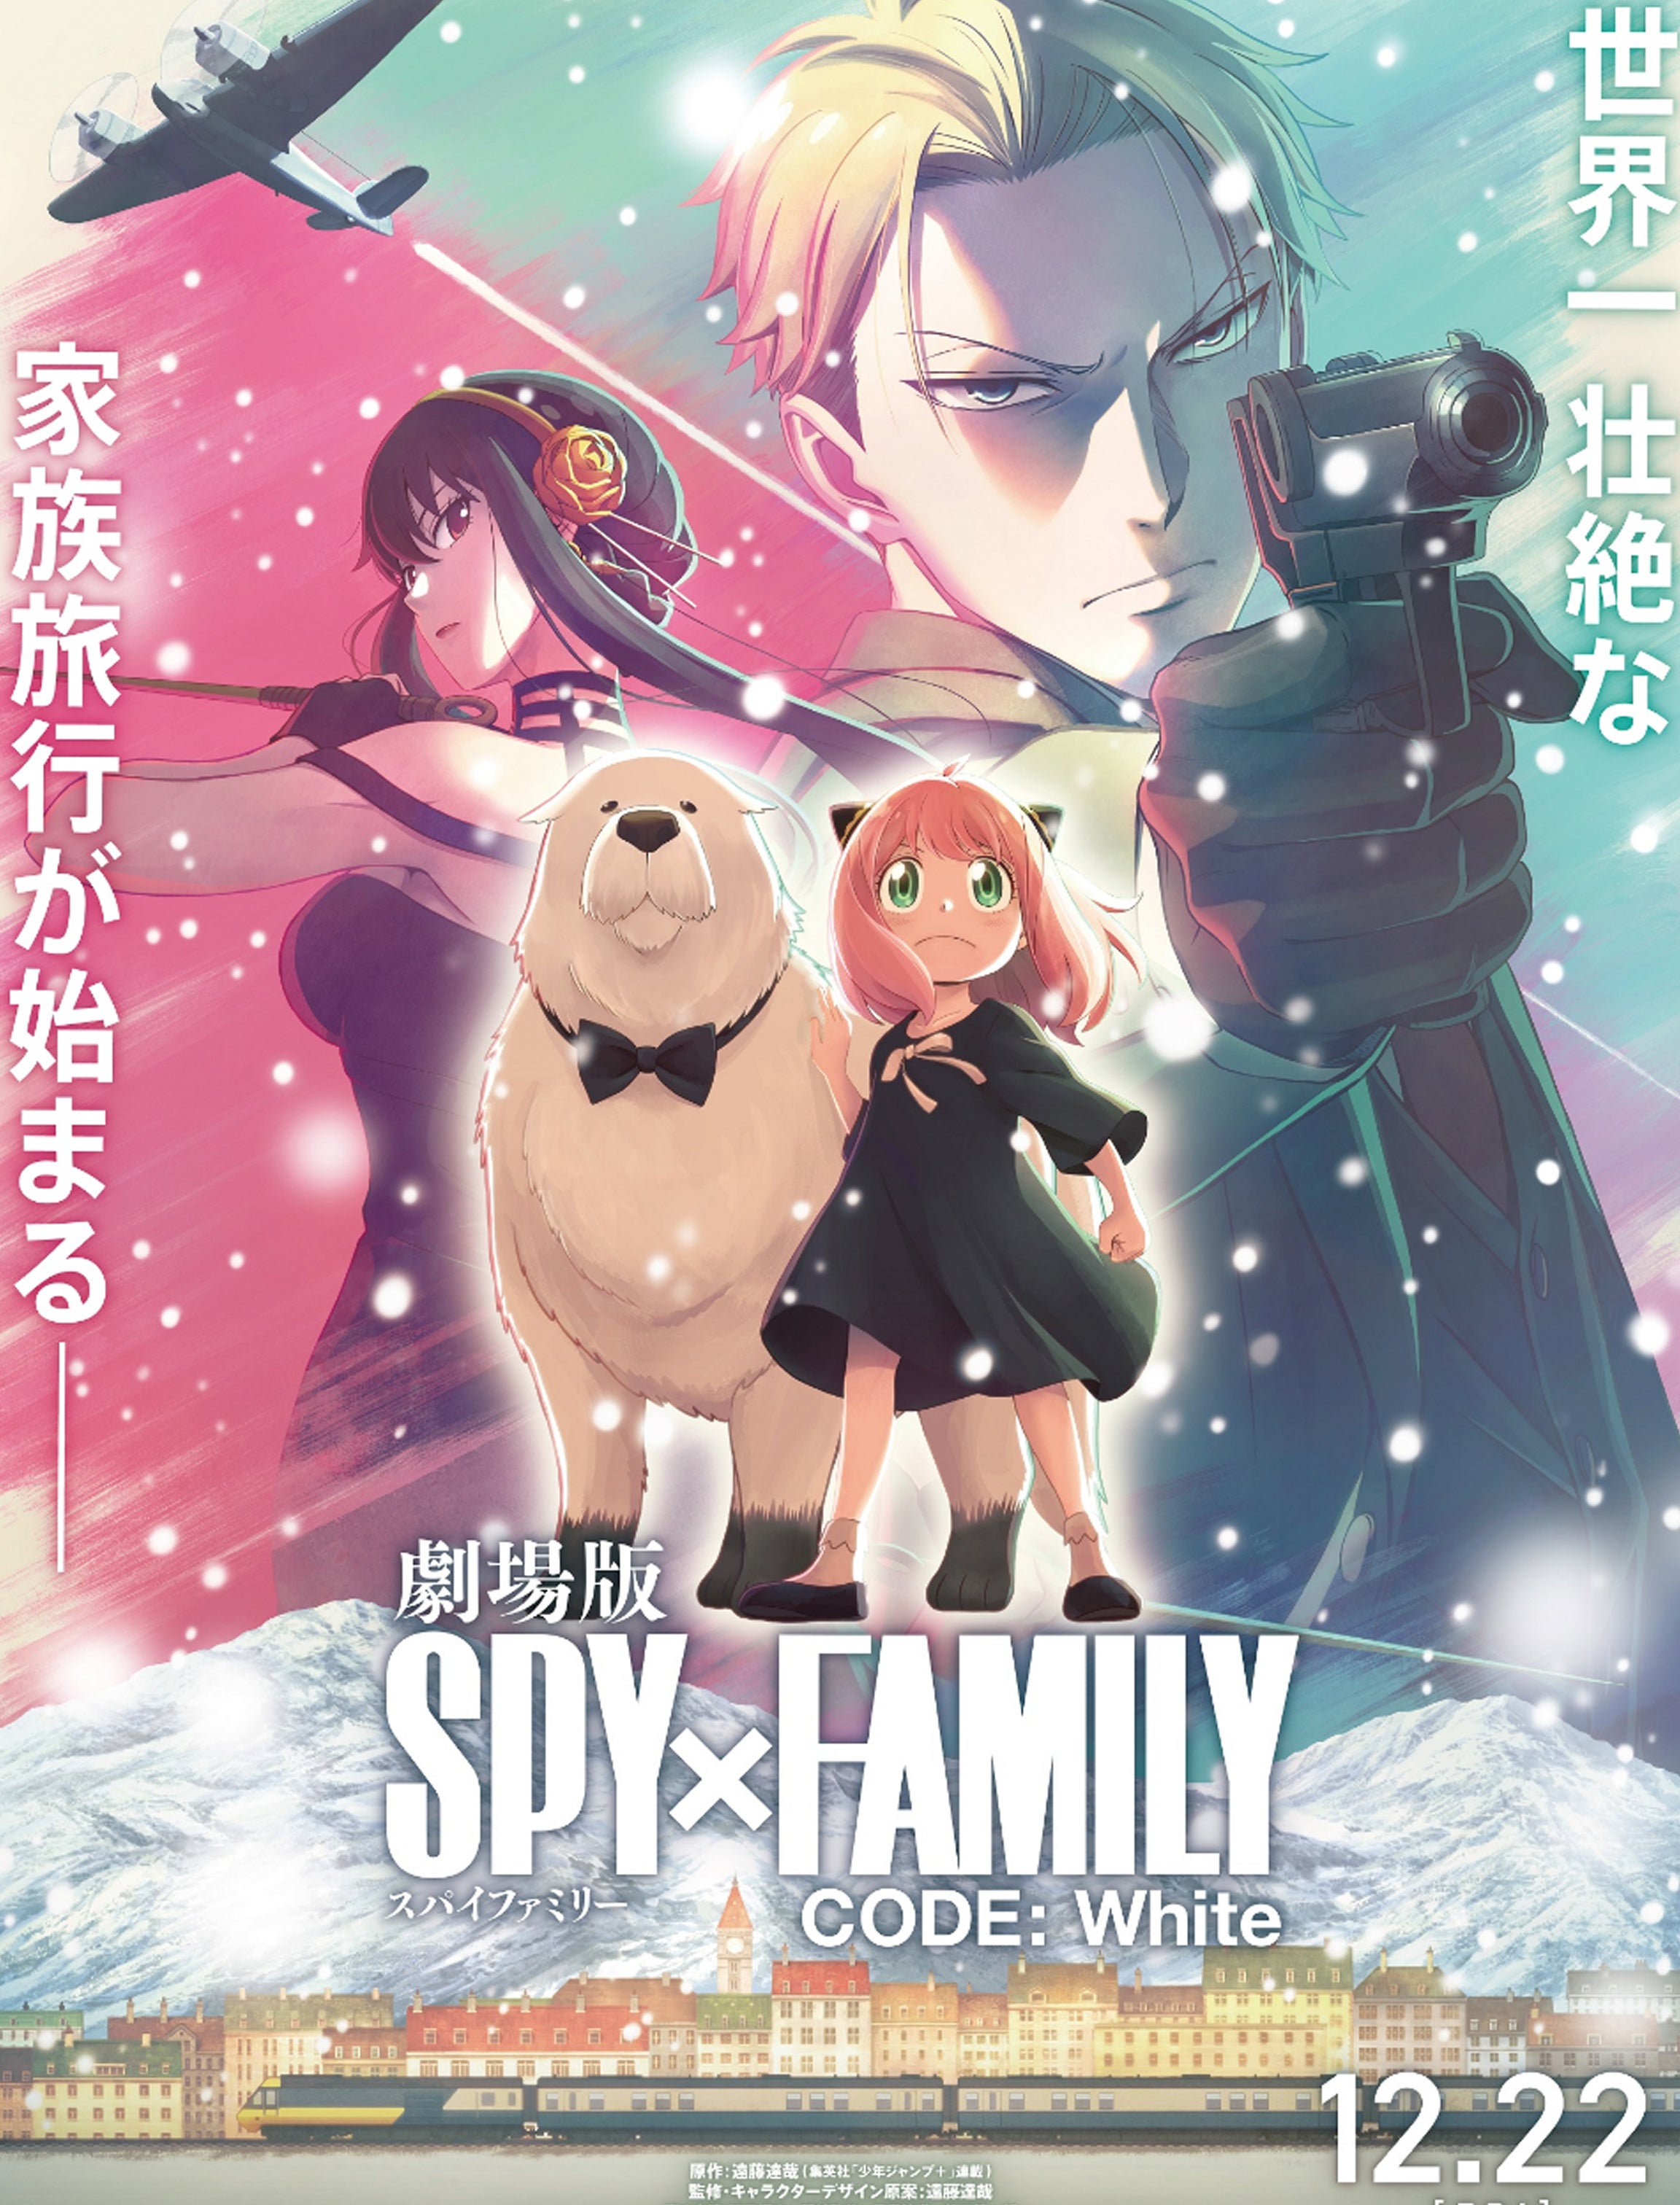 SPY x FAMILY Part 2 Episode 11 Release Date and Time on Crunchyroll   GameRevolution